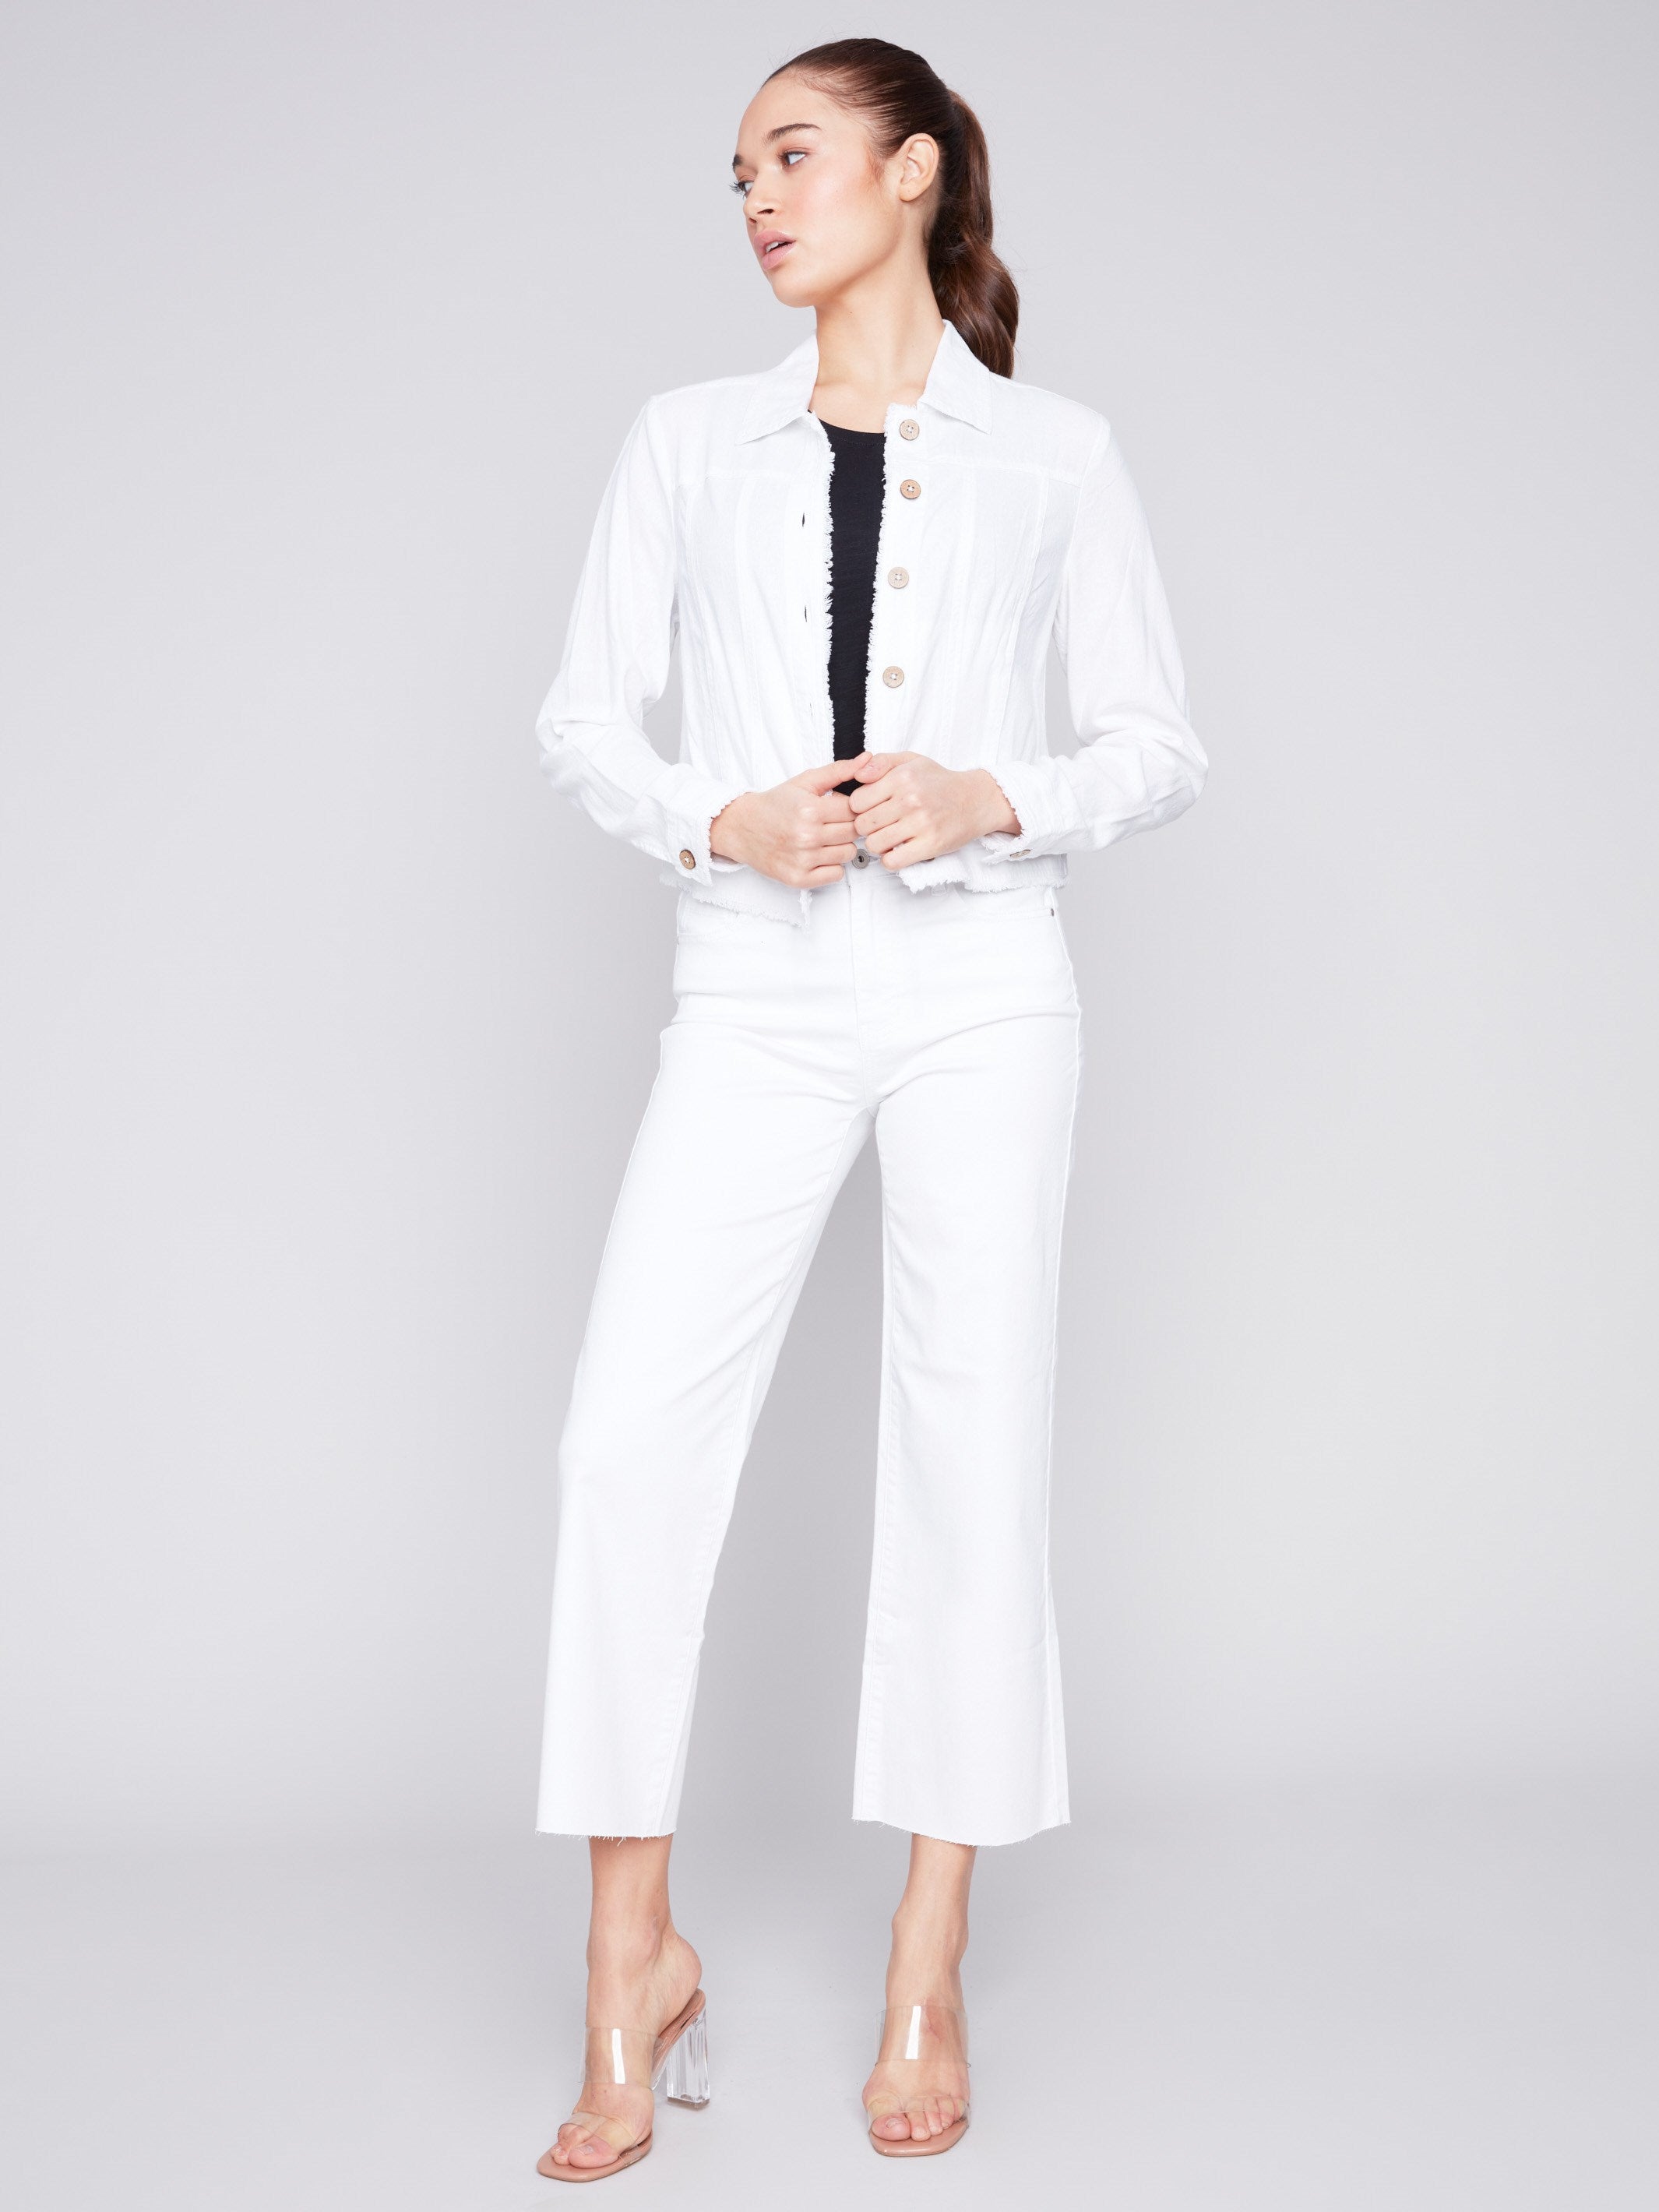 Linen Blend Jacket - White - Charlie B Collection Canada - Image 2